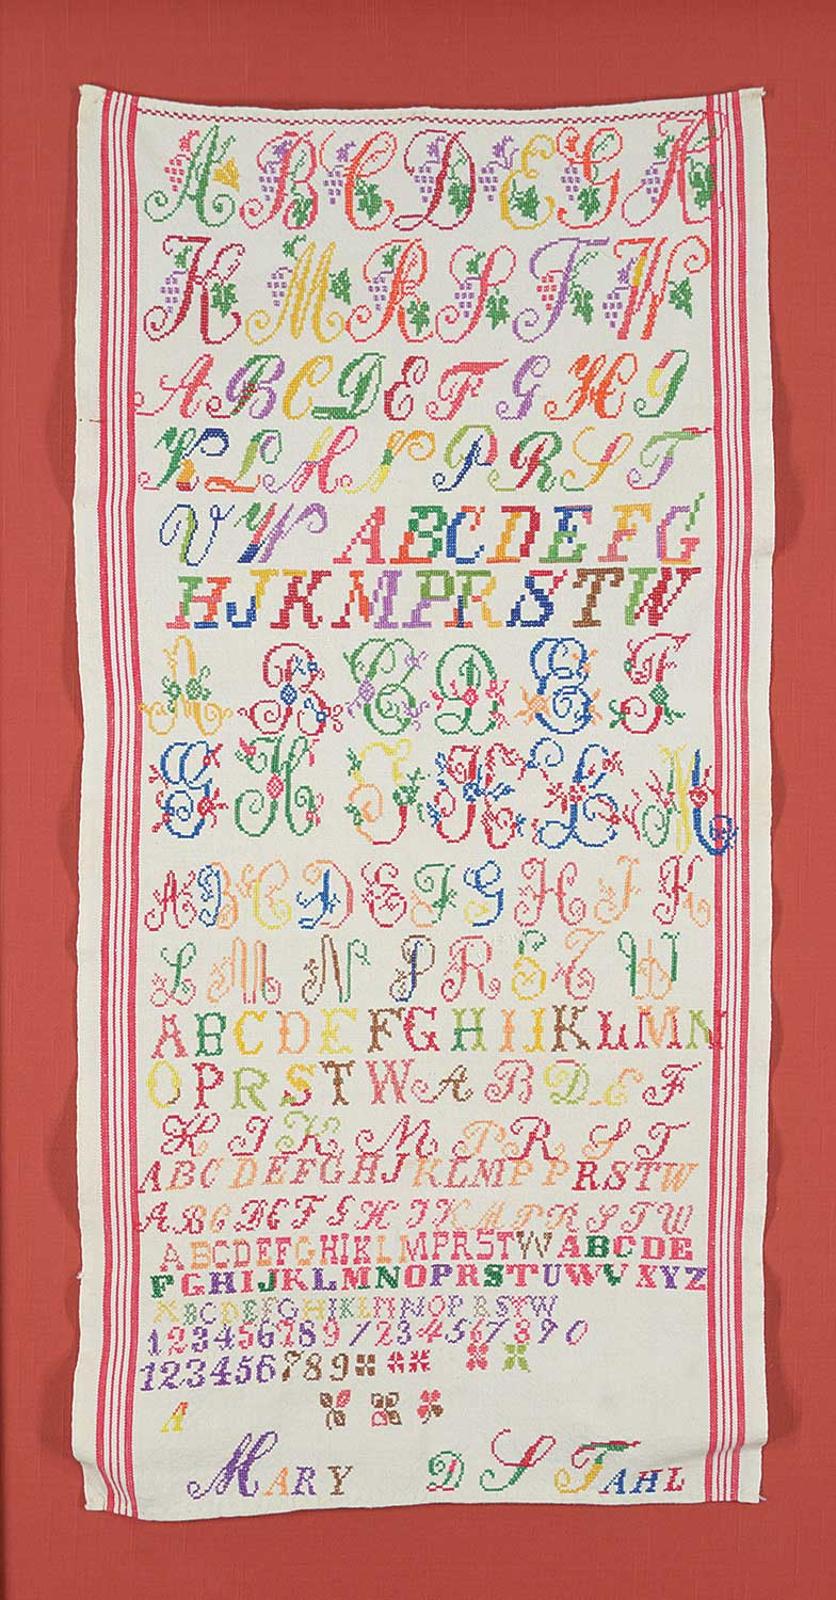 Mary D. L. Tahl - Untitled - Colourful Sampler